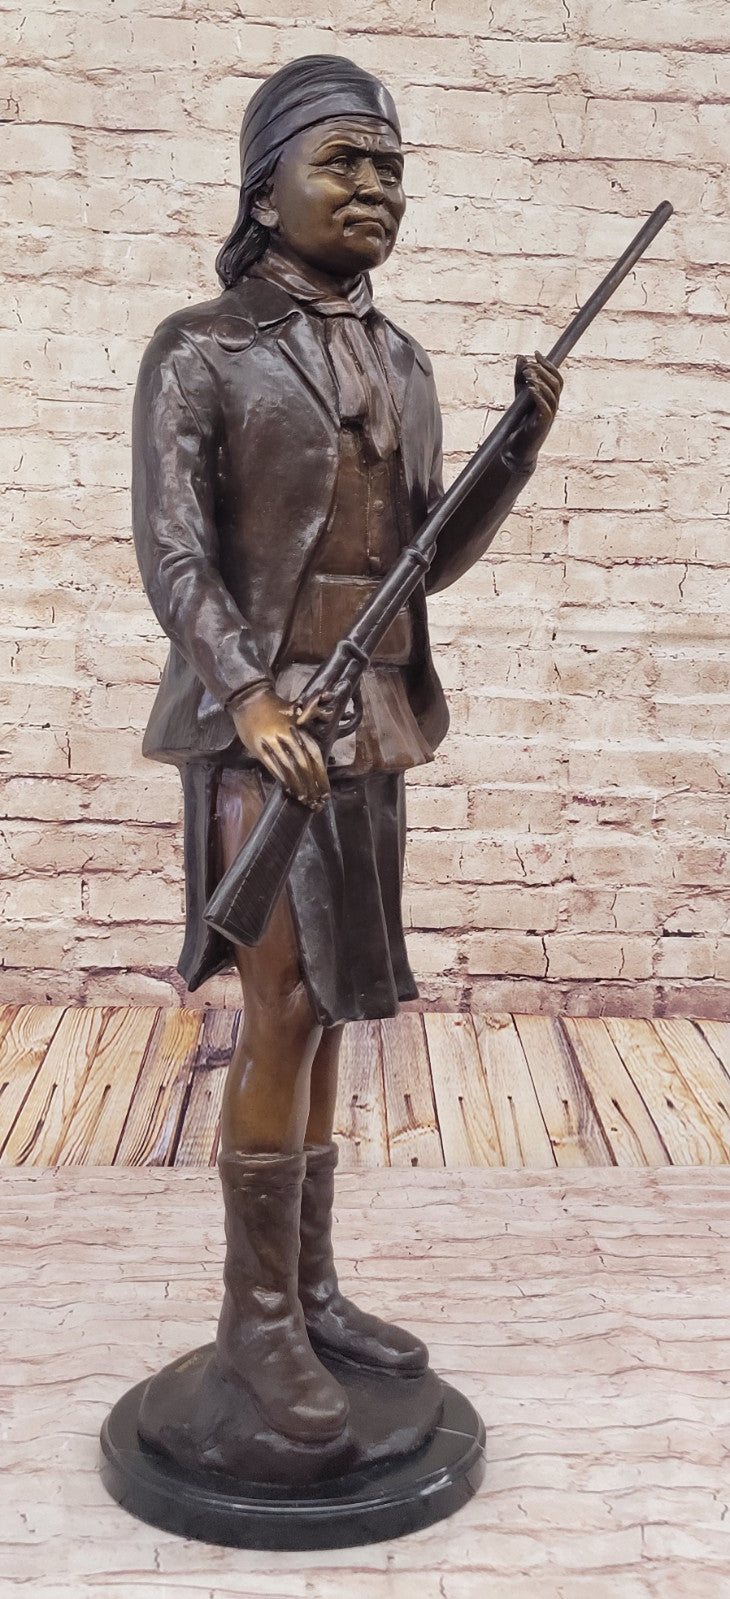 C.M Russell Bronze Sculpture Geronimo With Rifle Hot Cast Figure Statue